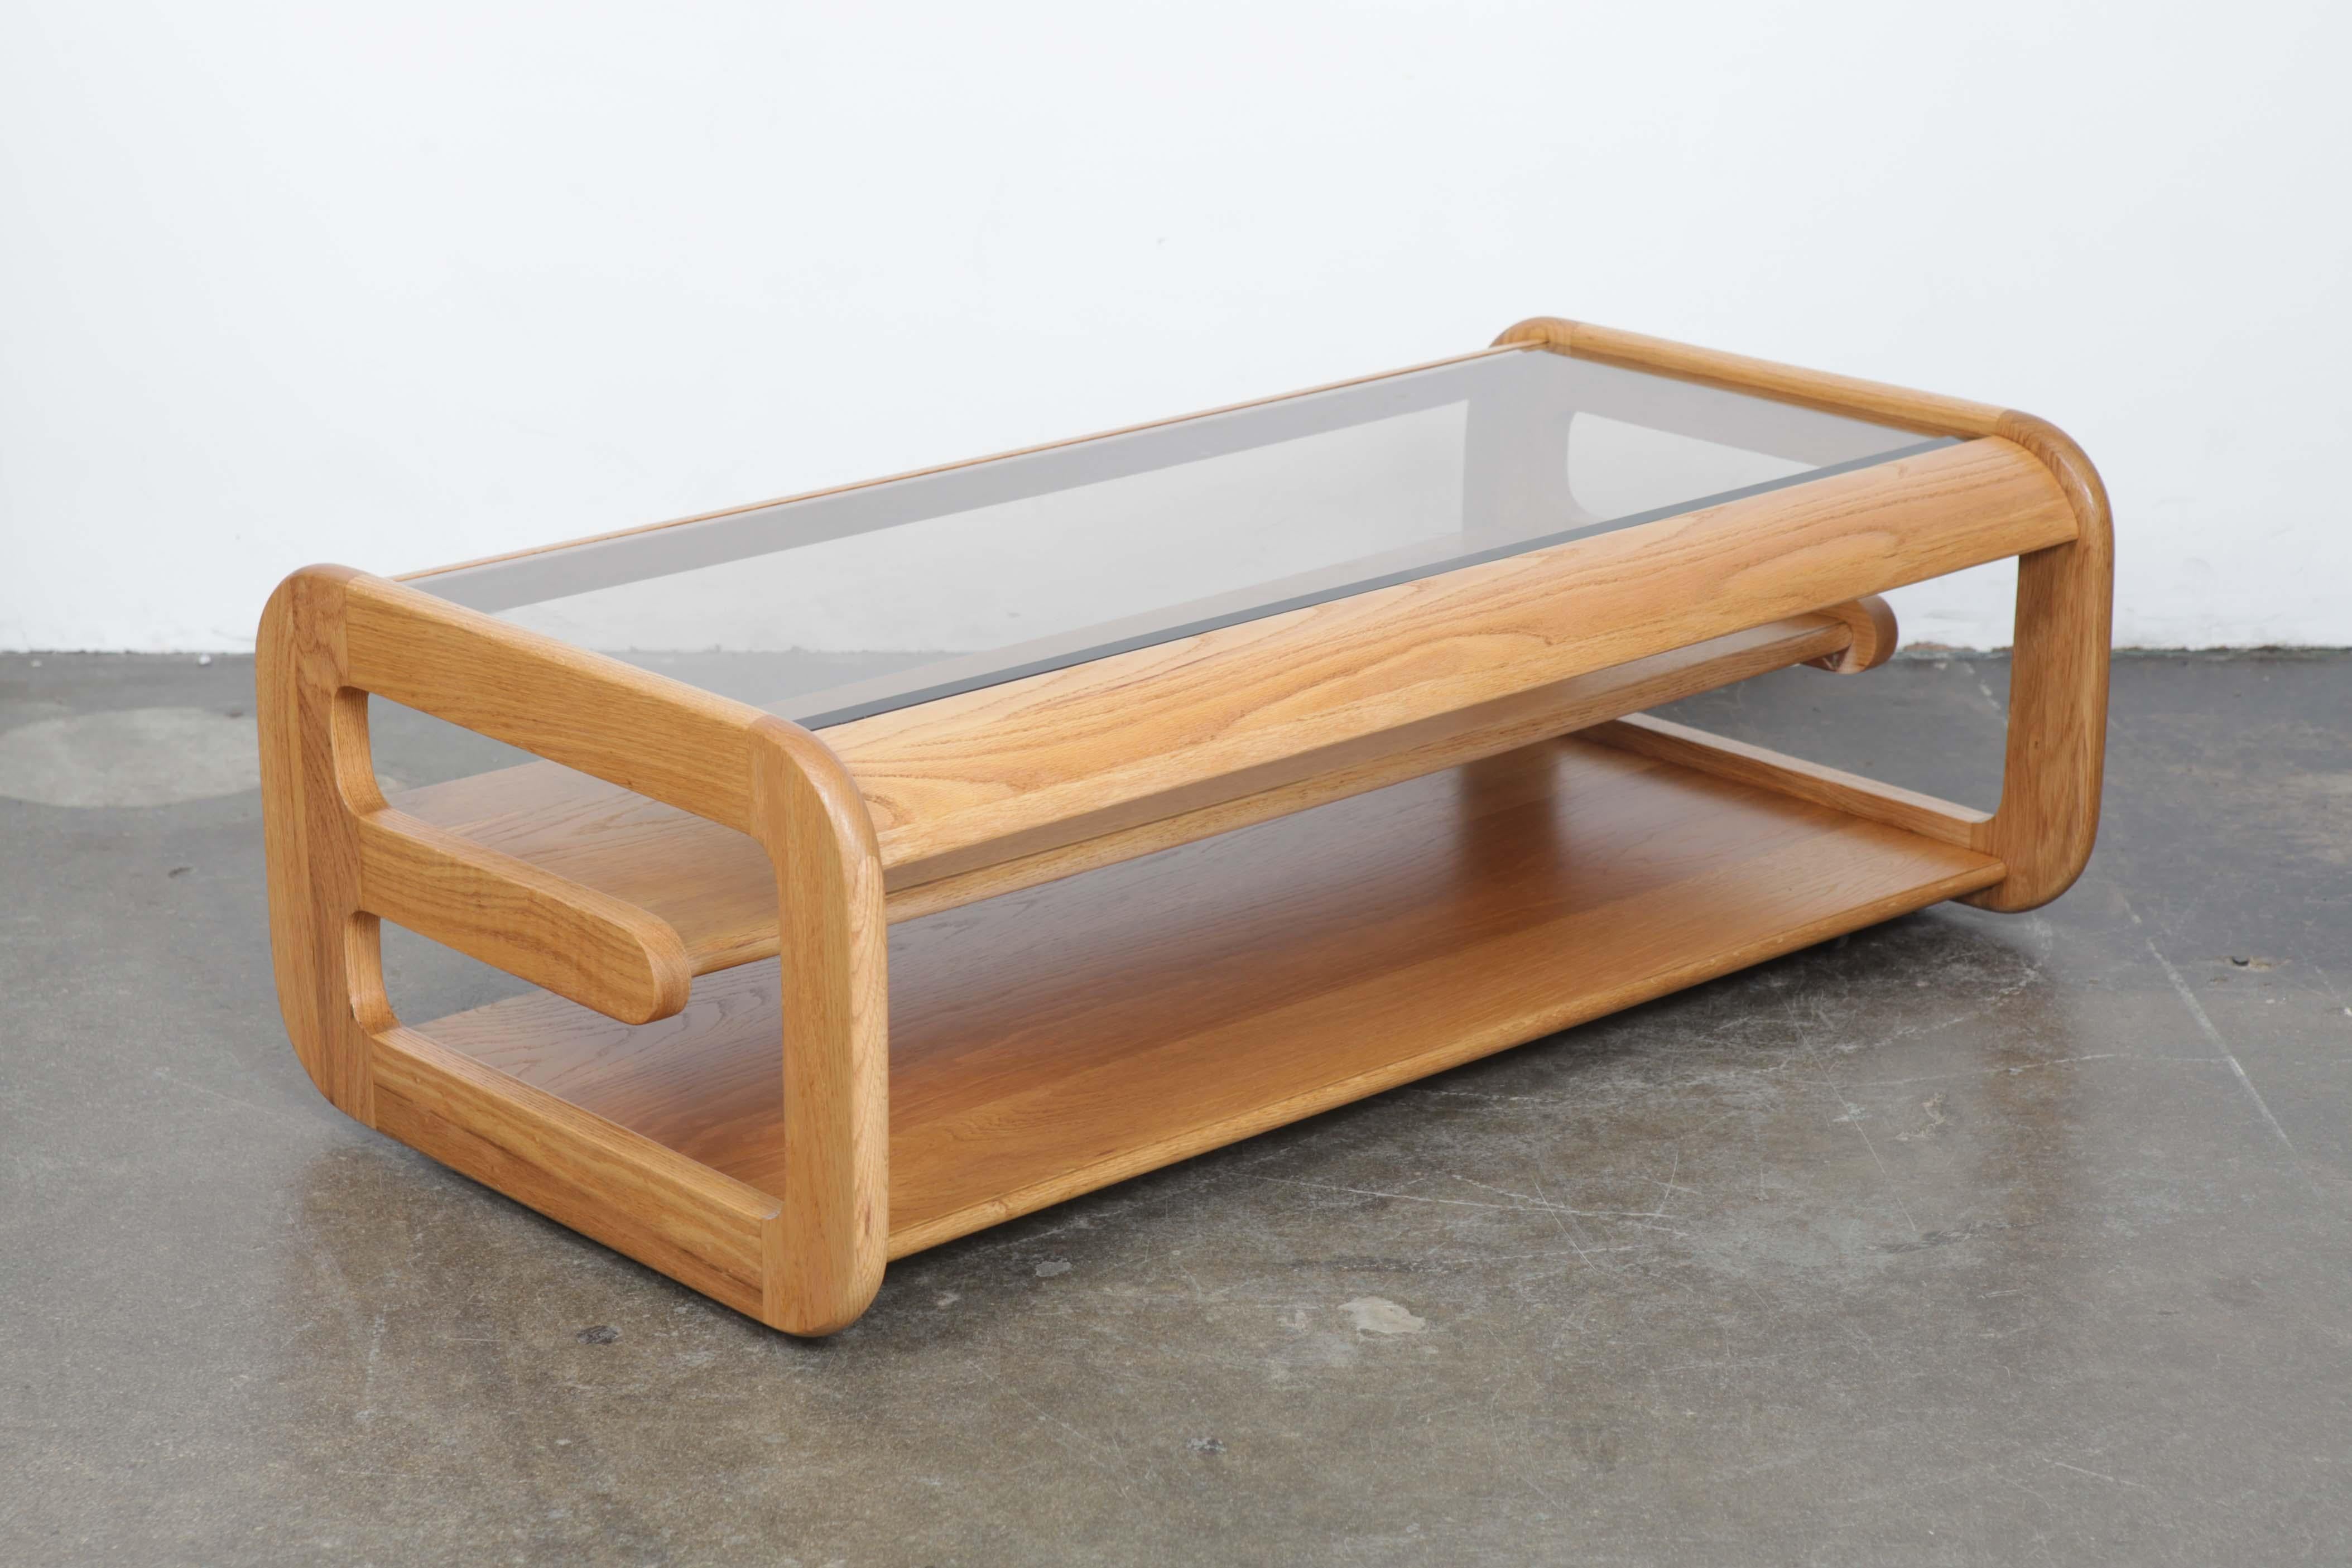 Newly refinished oak and smoke glass top coffee table designed by Lou Hodges for California Design Group, 1970s, with cantilevered centre shelf and upper glass top inset into the oak frame. Glass is original and has scratches commensurate with wear.